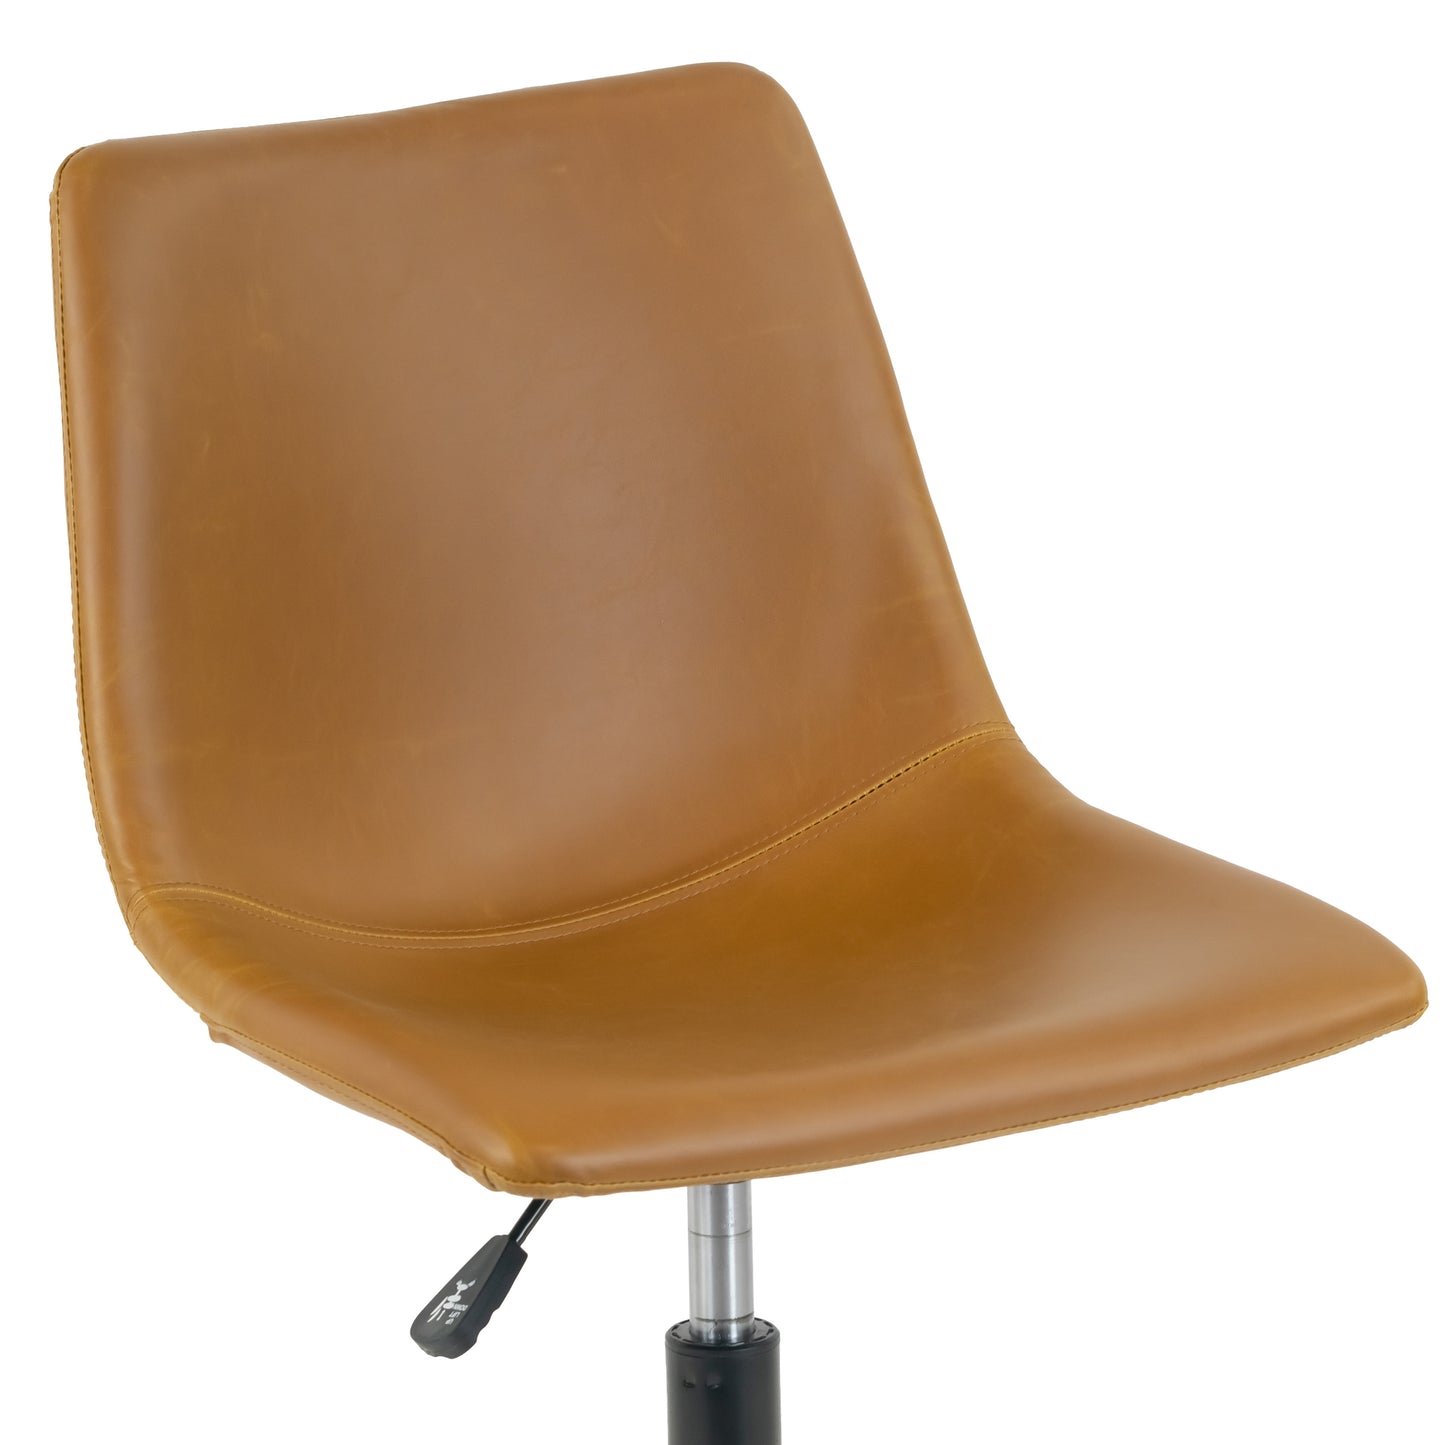 Adan Light Brown Faux Leather Adjustable Height Swivel Office Chair with Wheel Base